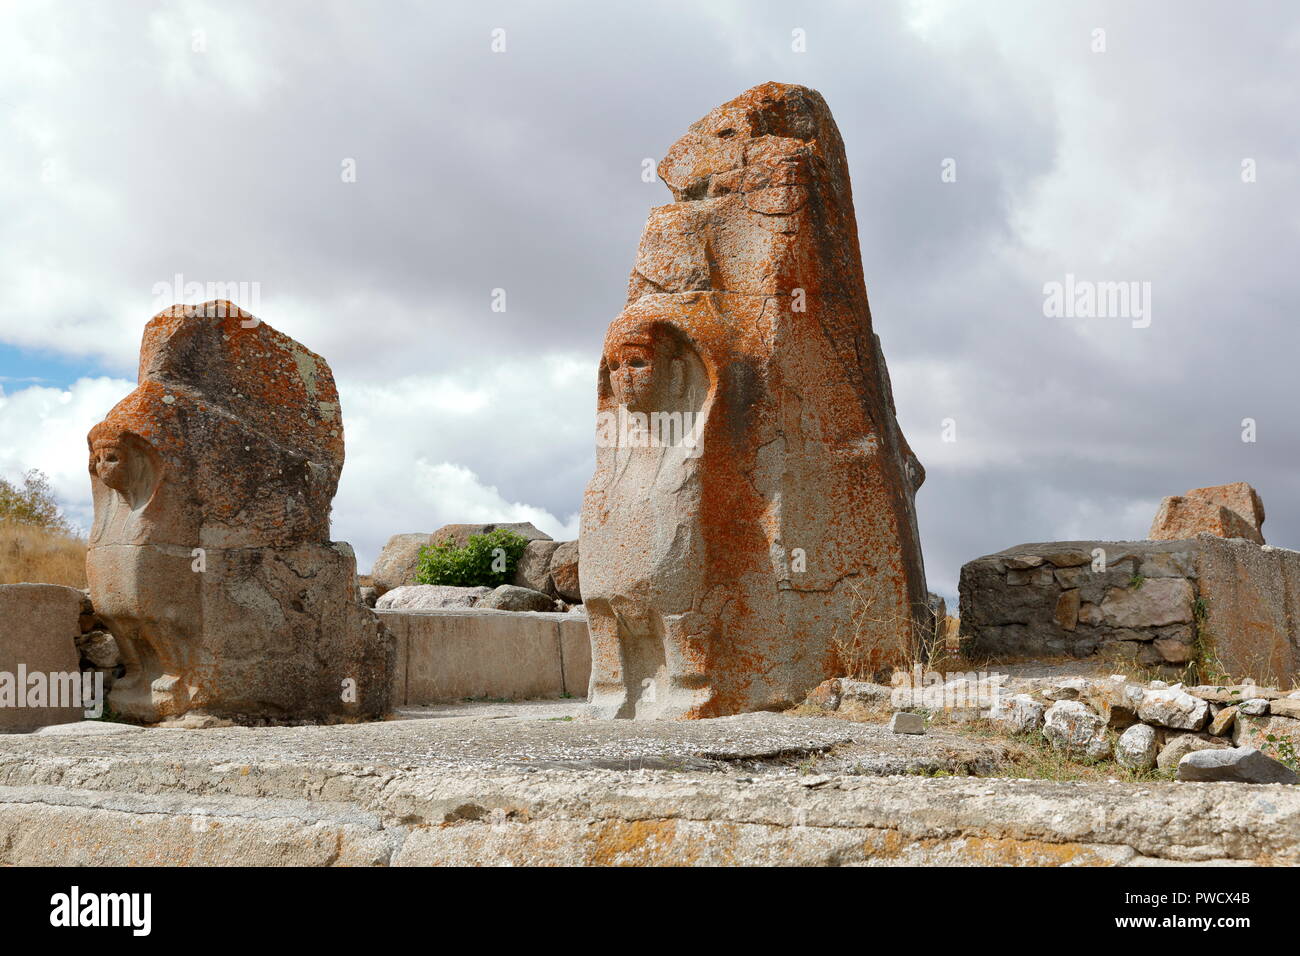 Hattusha, the capital of the Hittite empire in the world heritage of Unesco, was discovered in Anatolia. Stock Photo